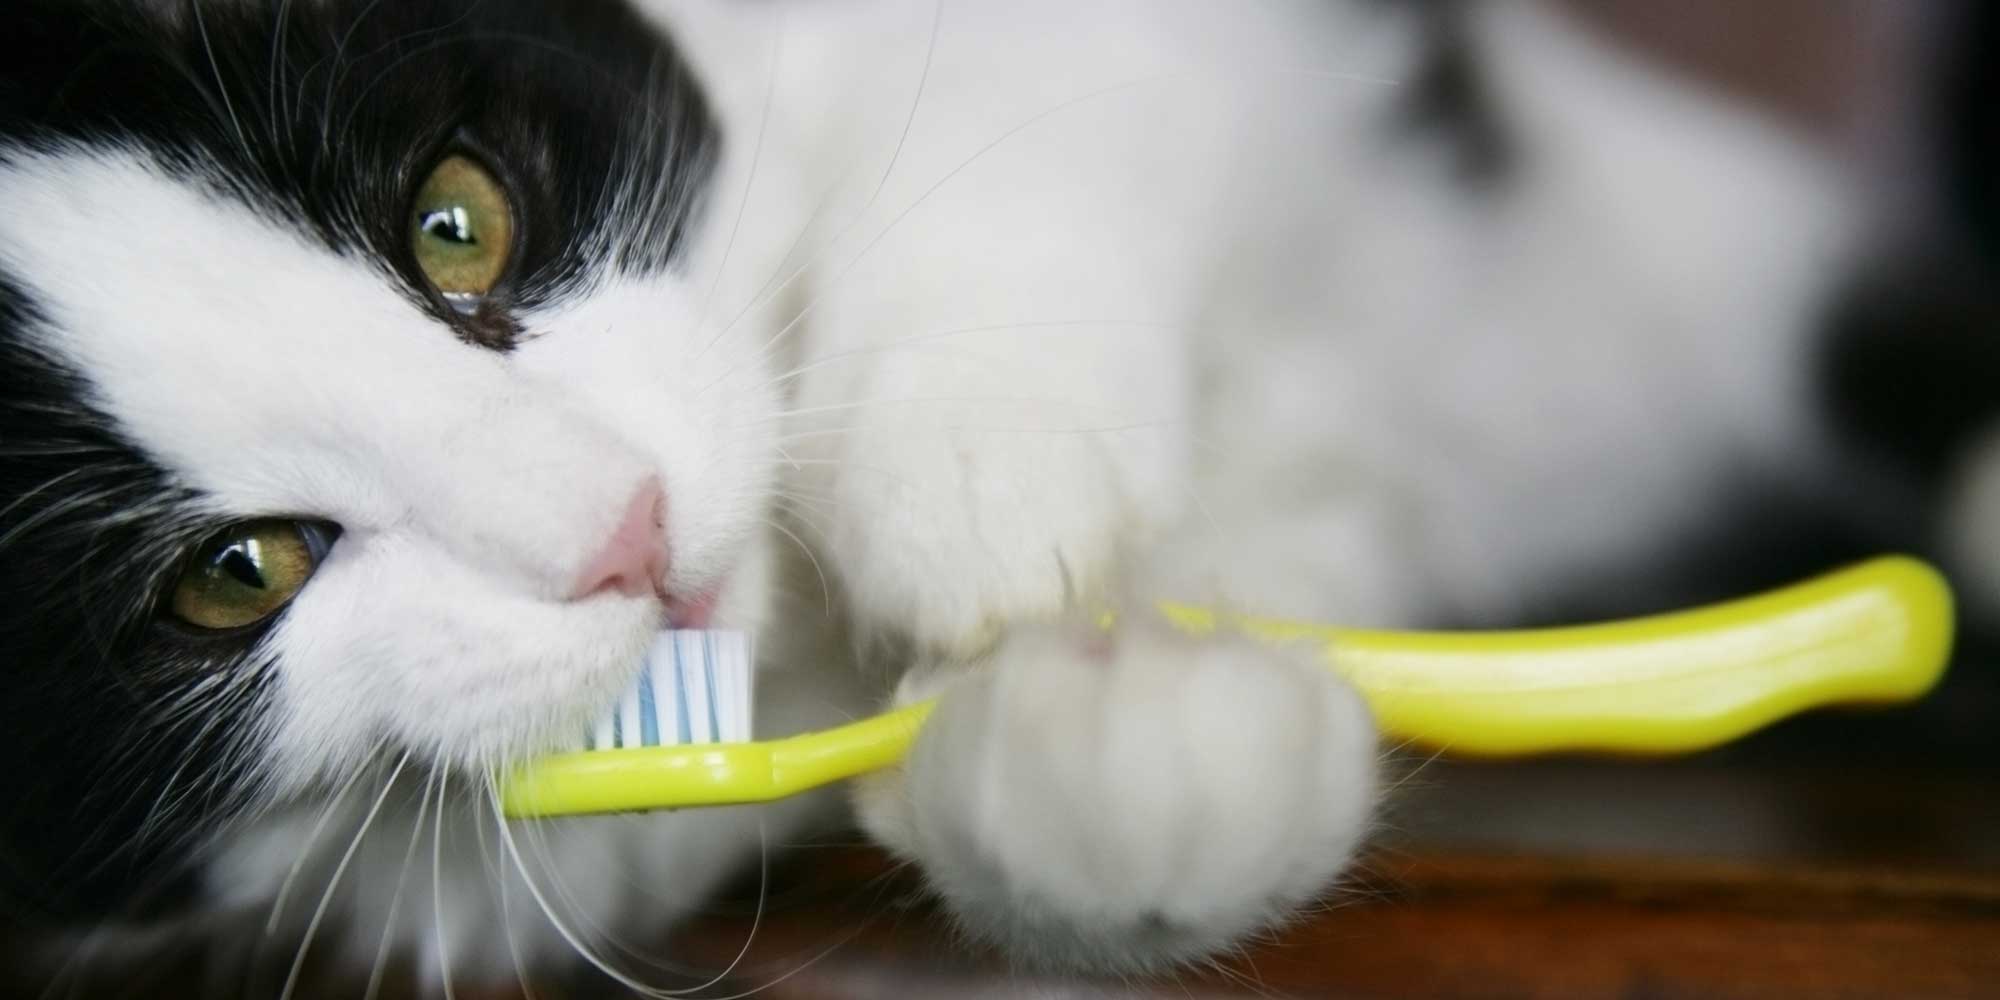 A cat playing with a toothbrush